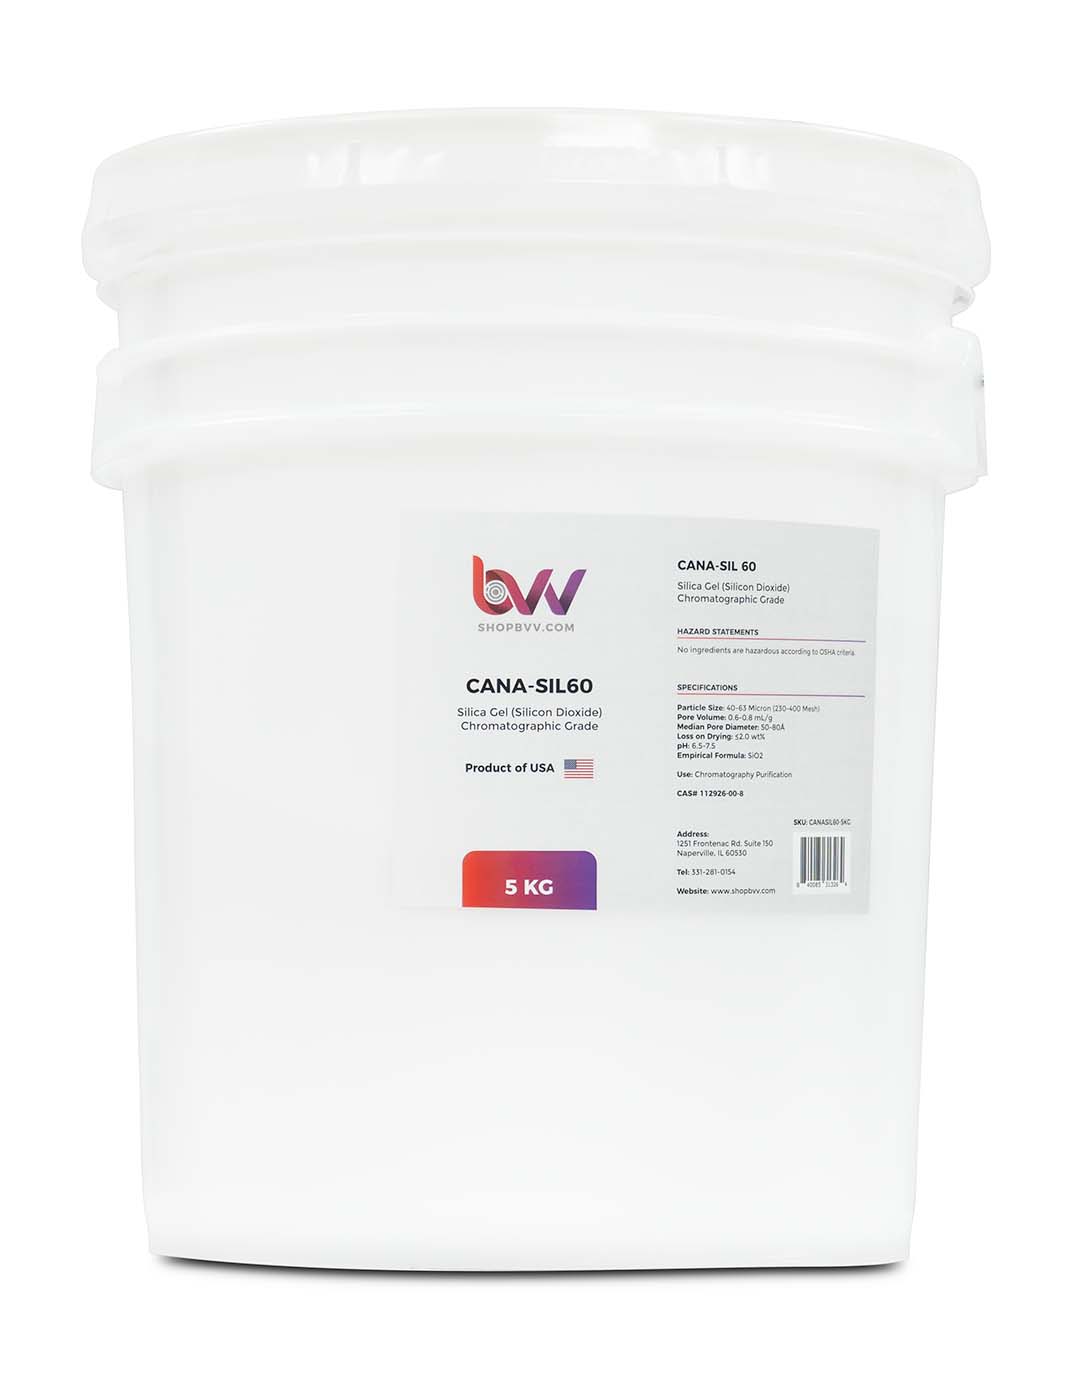 CANA-SIL60™ Silica Gel 60A Chromatographic Grade 40-63 micron (230-400 Mesh) New Products BVV 5 Kg 